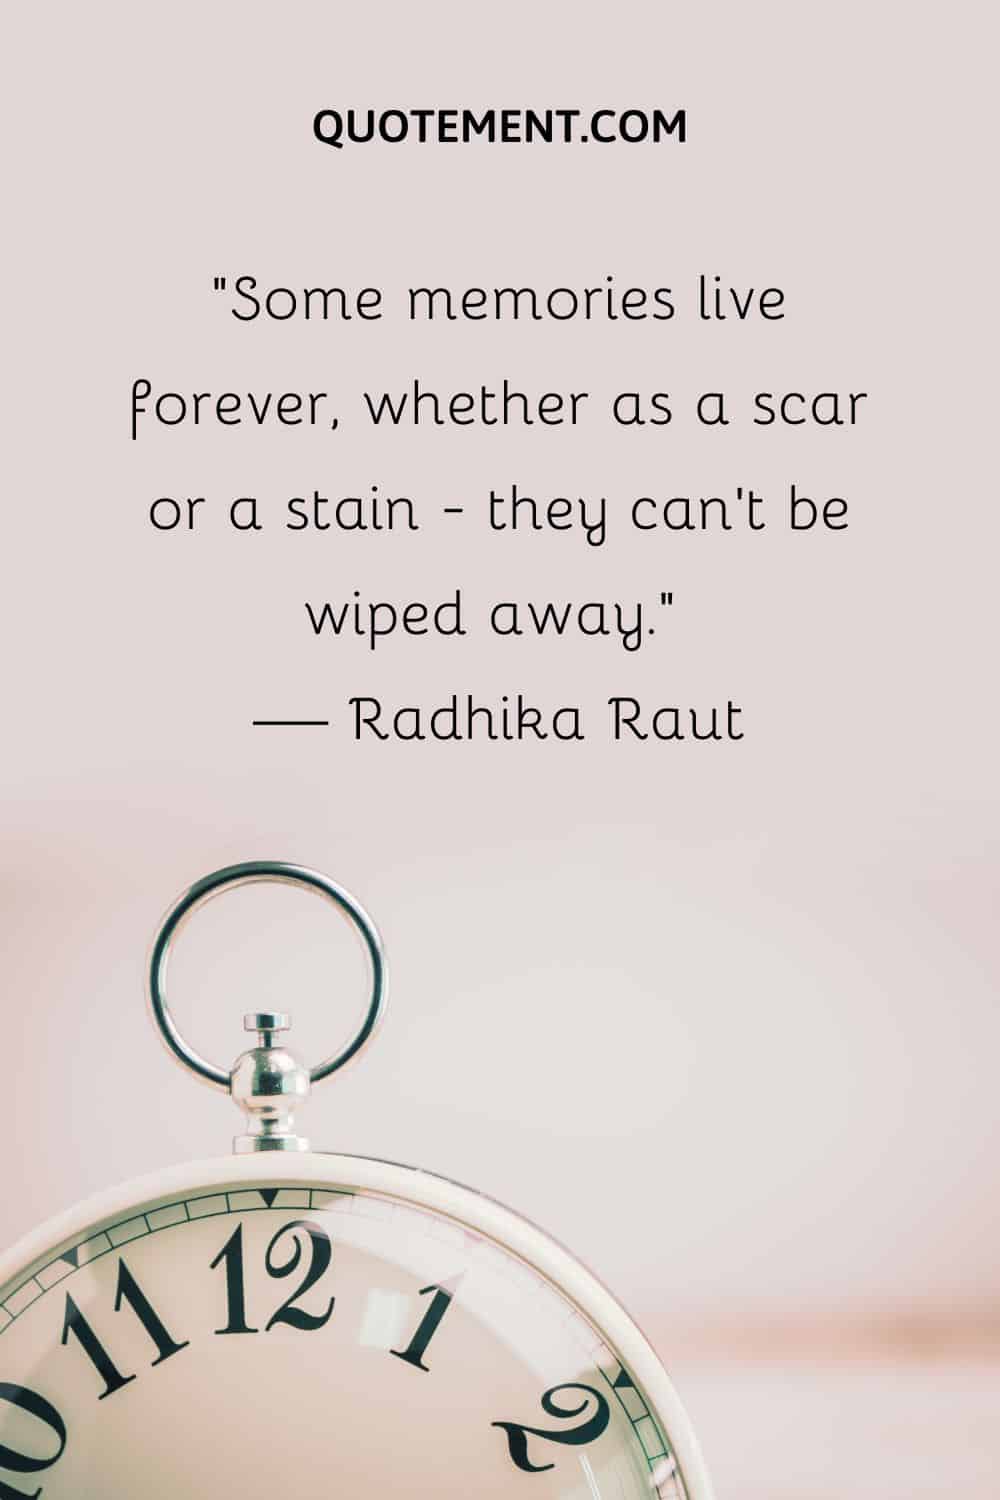 Some memories live forever, whether as a scar or a stain